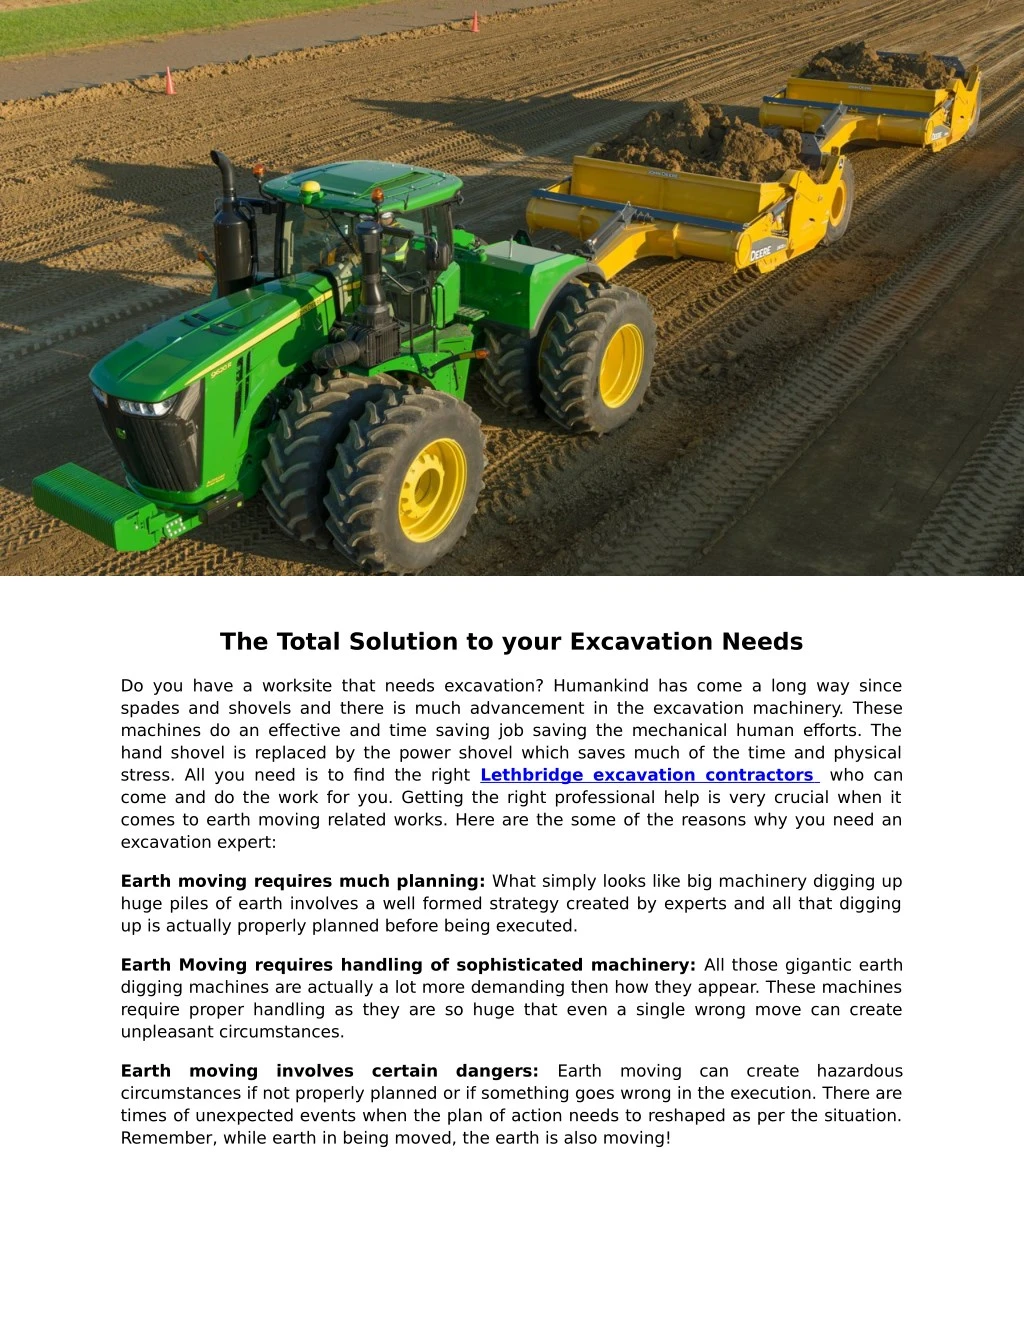 the total solution to your excavation needs